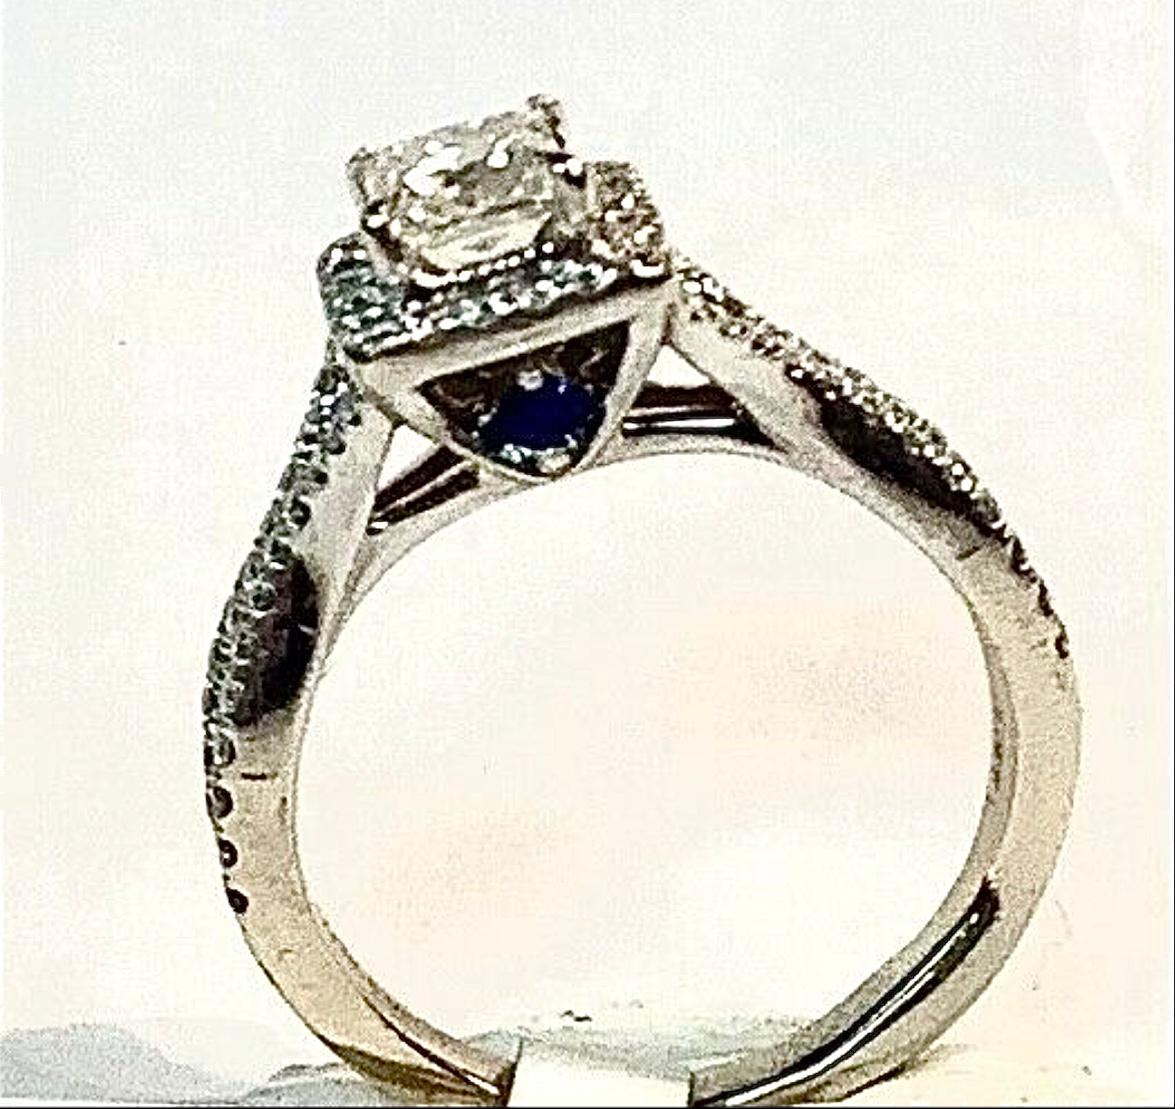 Beautiful 14K White Gold Vera Wang Diamond engagement ring with two small sapphire stones from the Vera Wang Love Collection. The two sapphire stones stand for faithfulness and everlasting love.  4.33 Grams TW. The dimension of the emerald cut